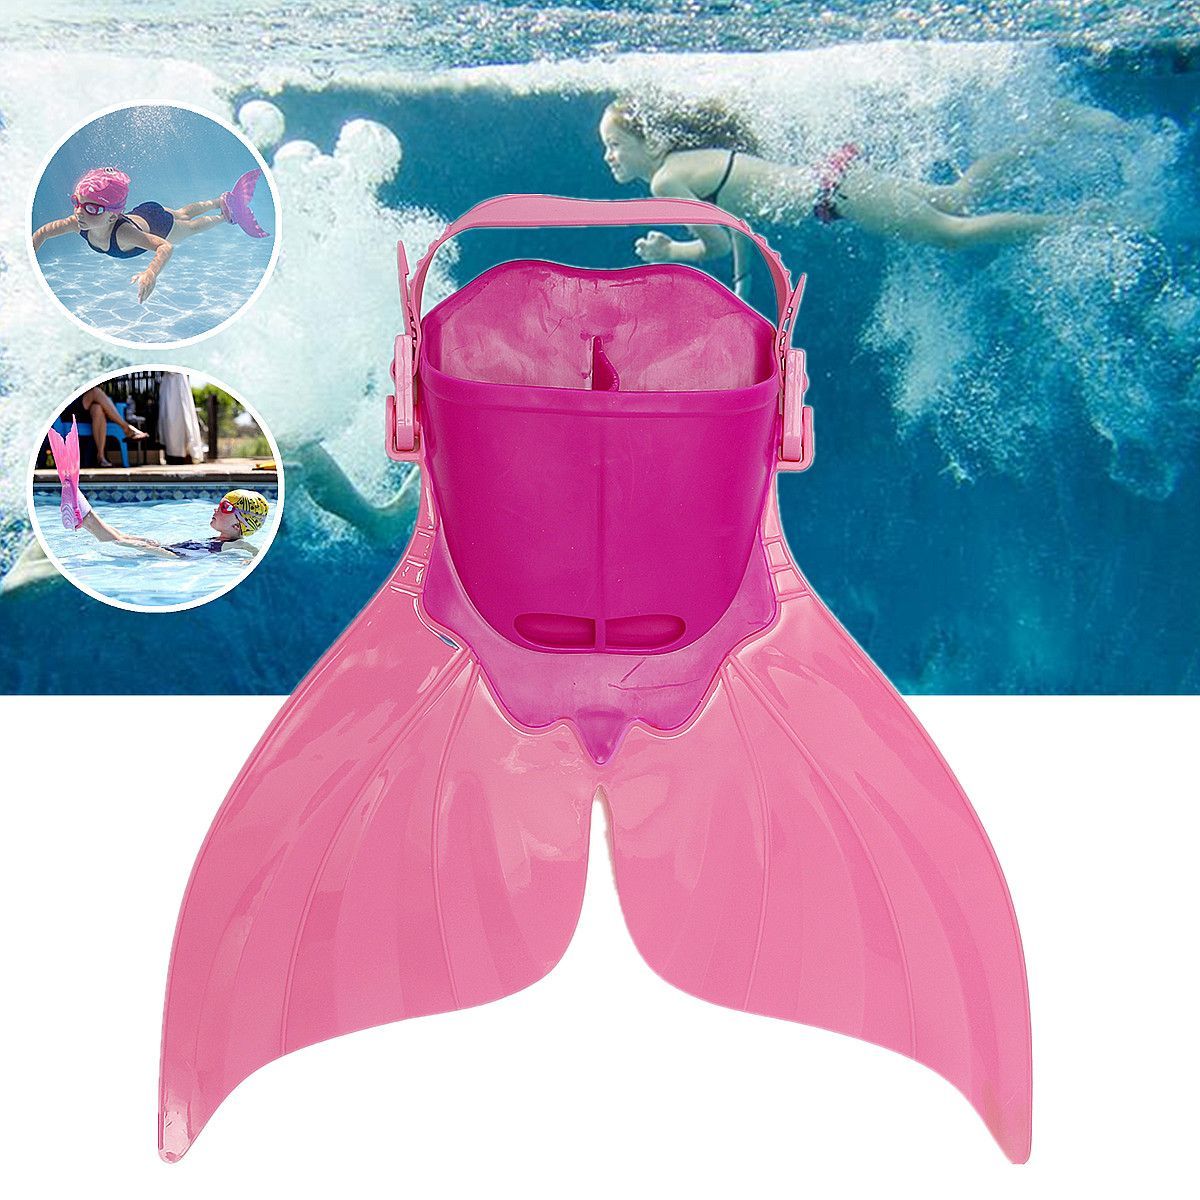 Kids-Mermaid-Tail-Swimming-Fin-Foot-Training-Flipper-Shoes-Monofin-Diving-Flippers-1453426